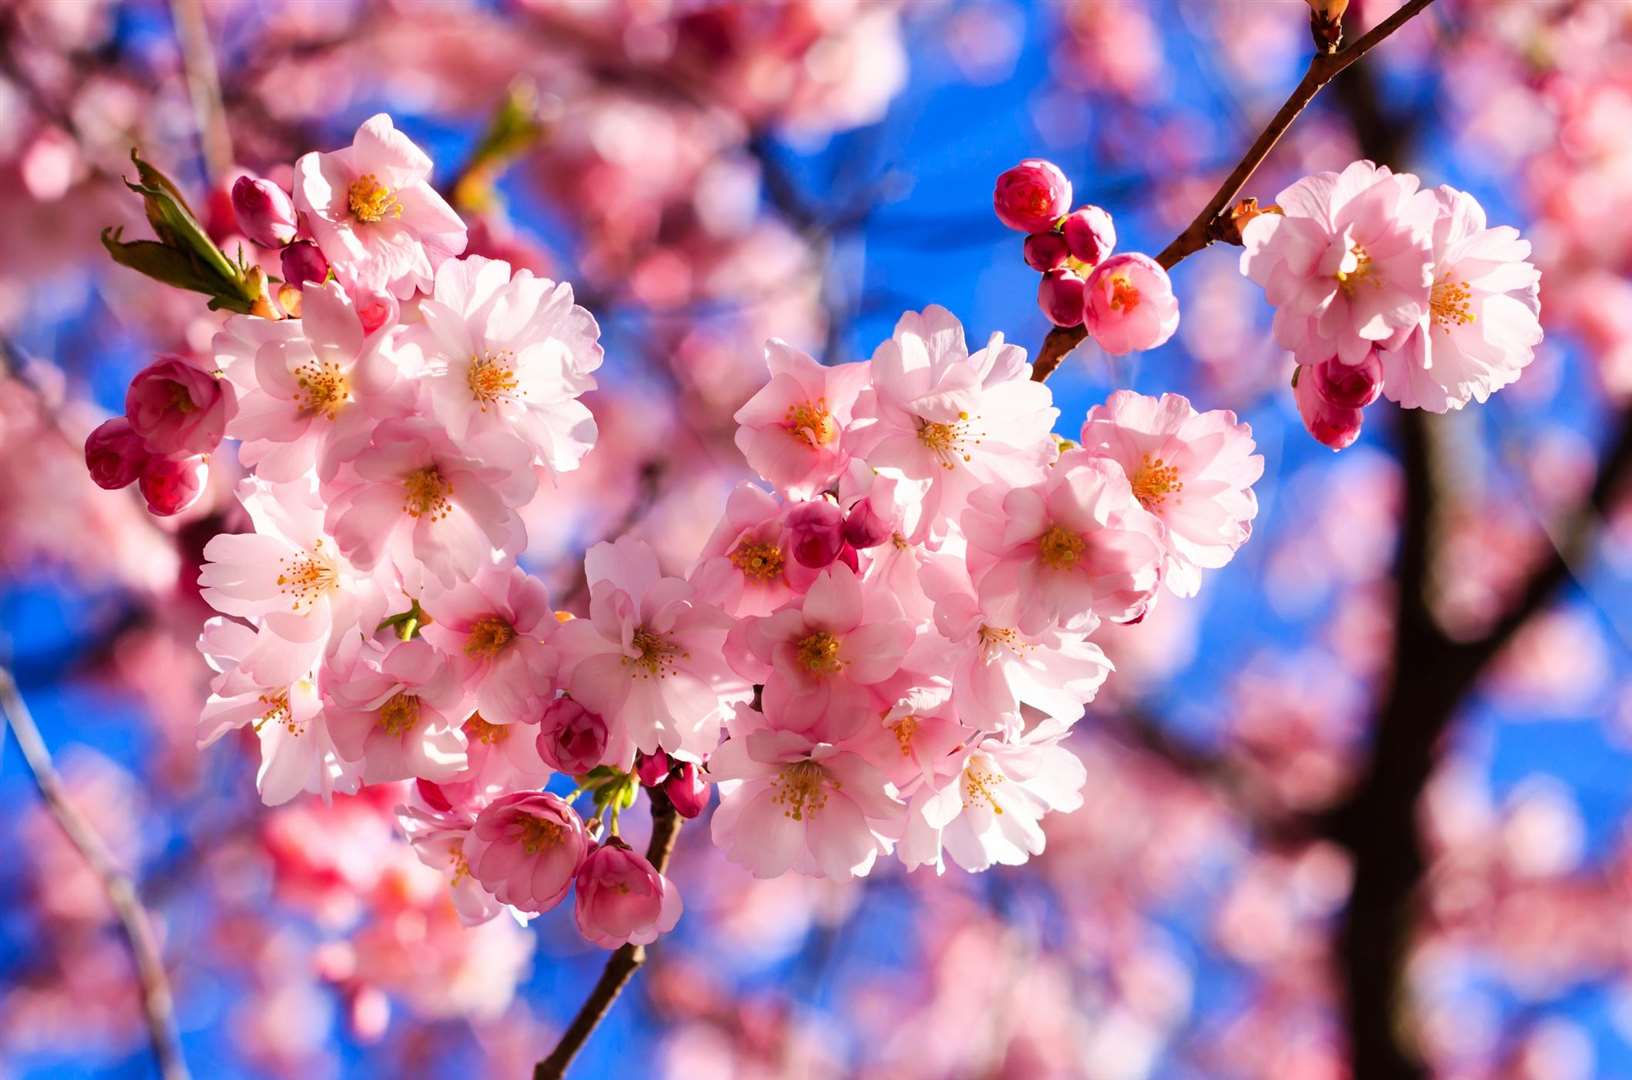 There had been signs a mild winter would lead to an early spring. Image: istock/bannerwega.